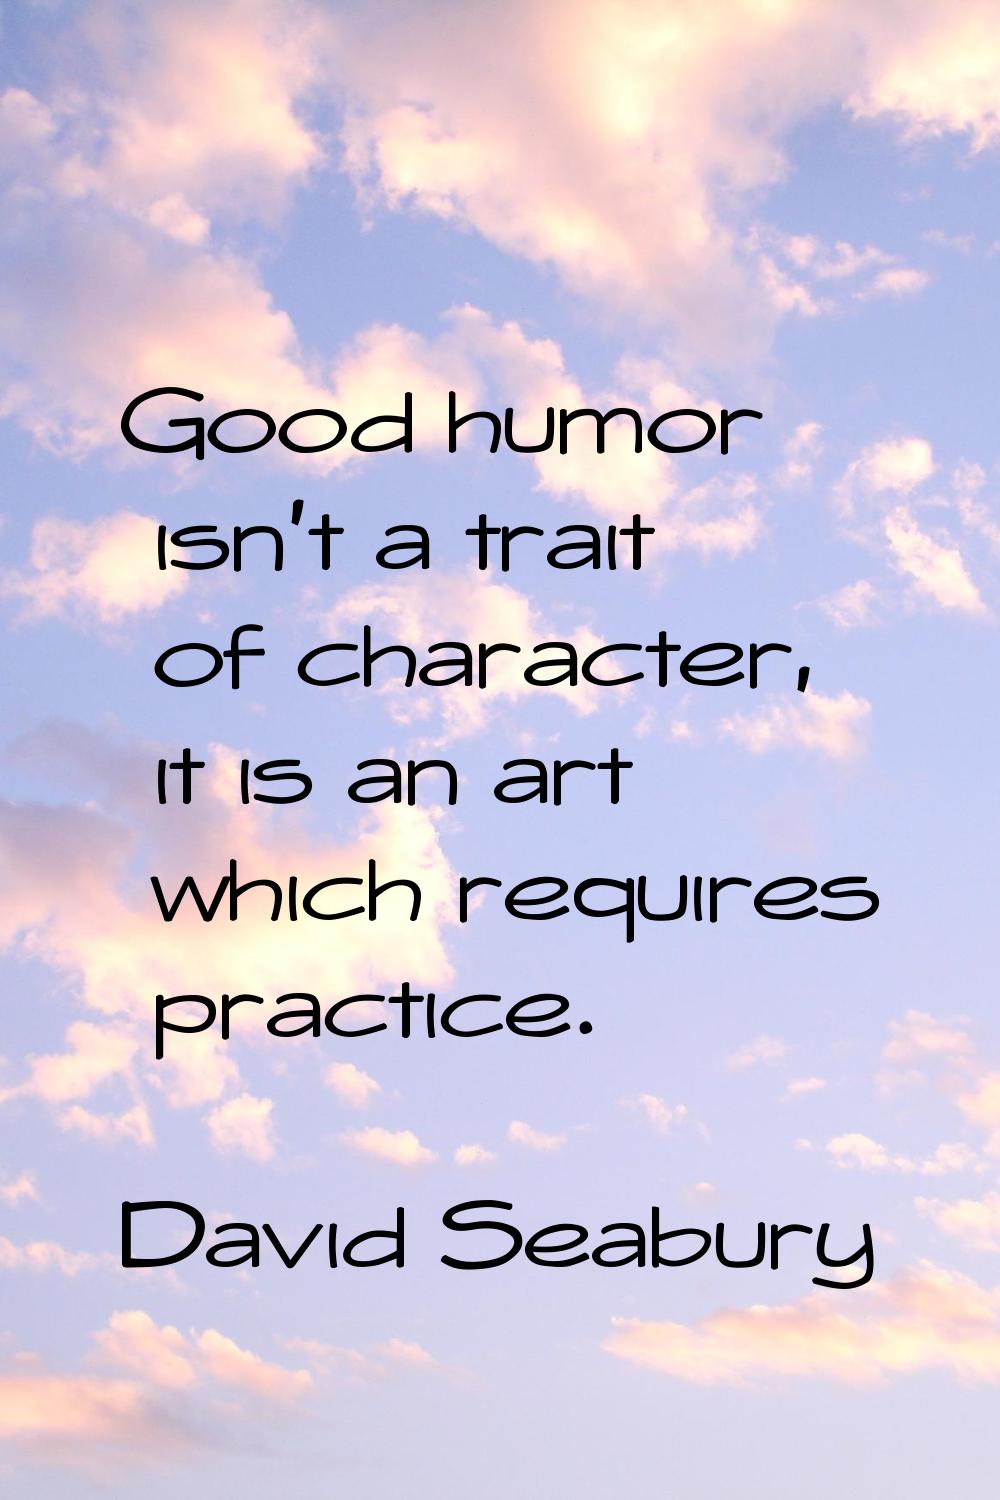 Good humor isn't a trait of character, it is an art which requires practice.